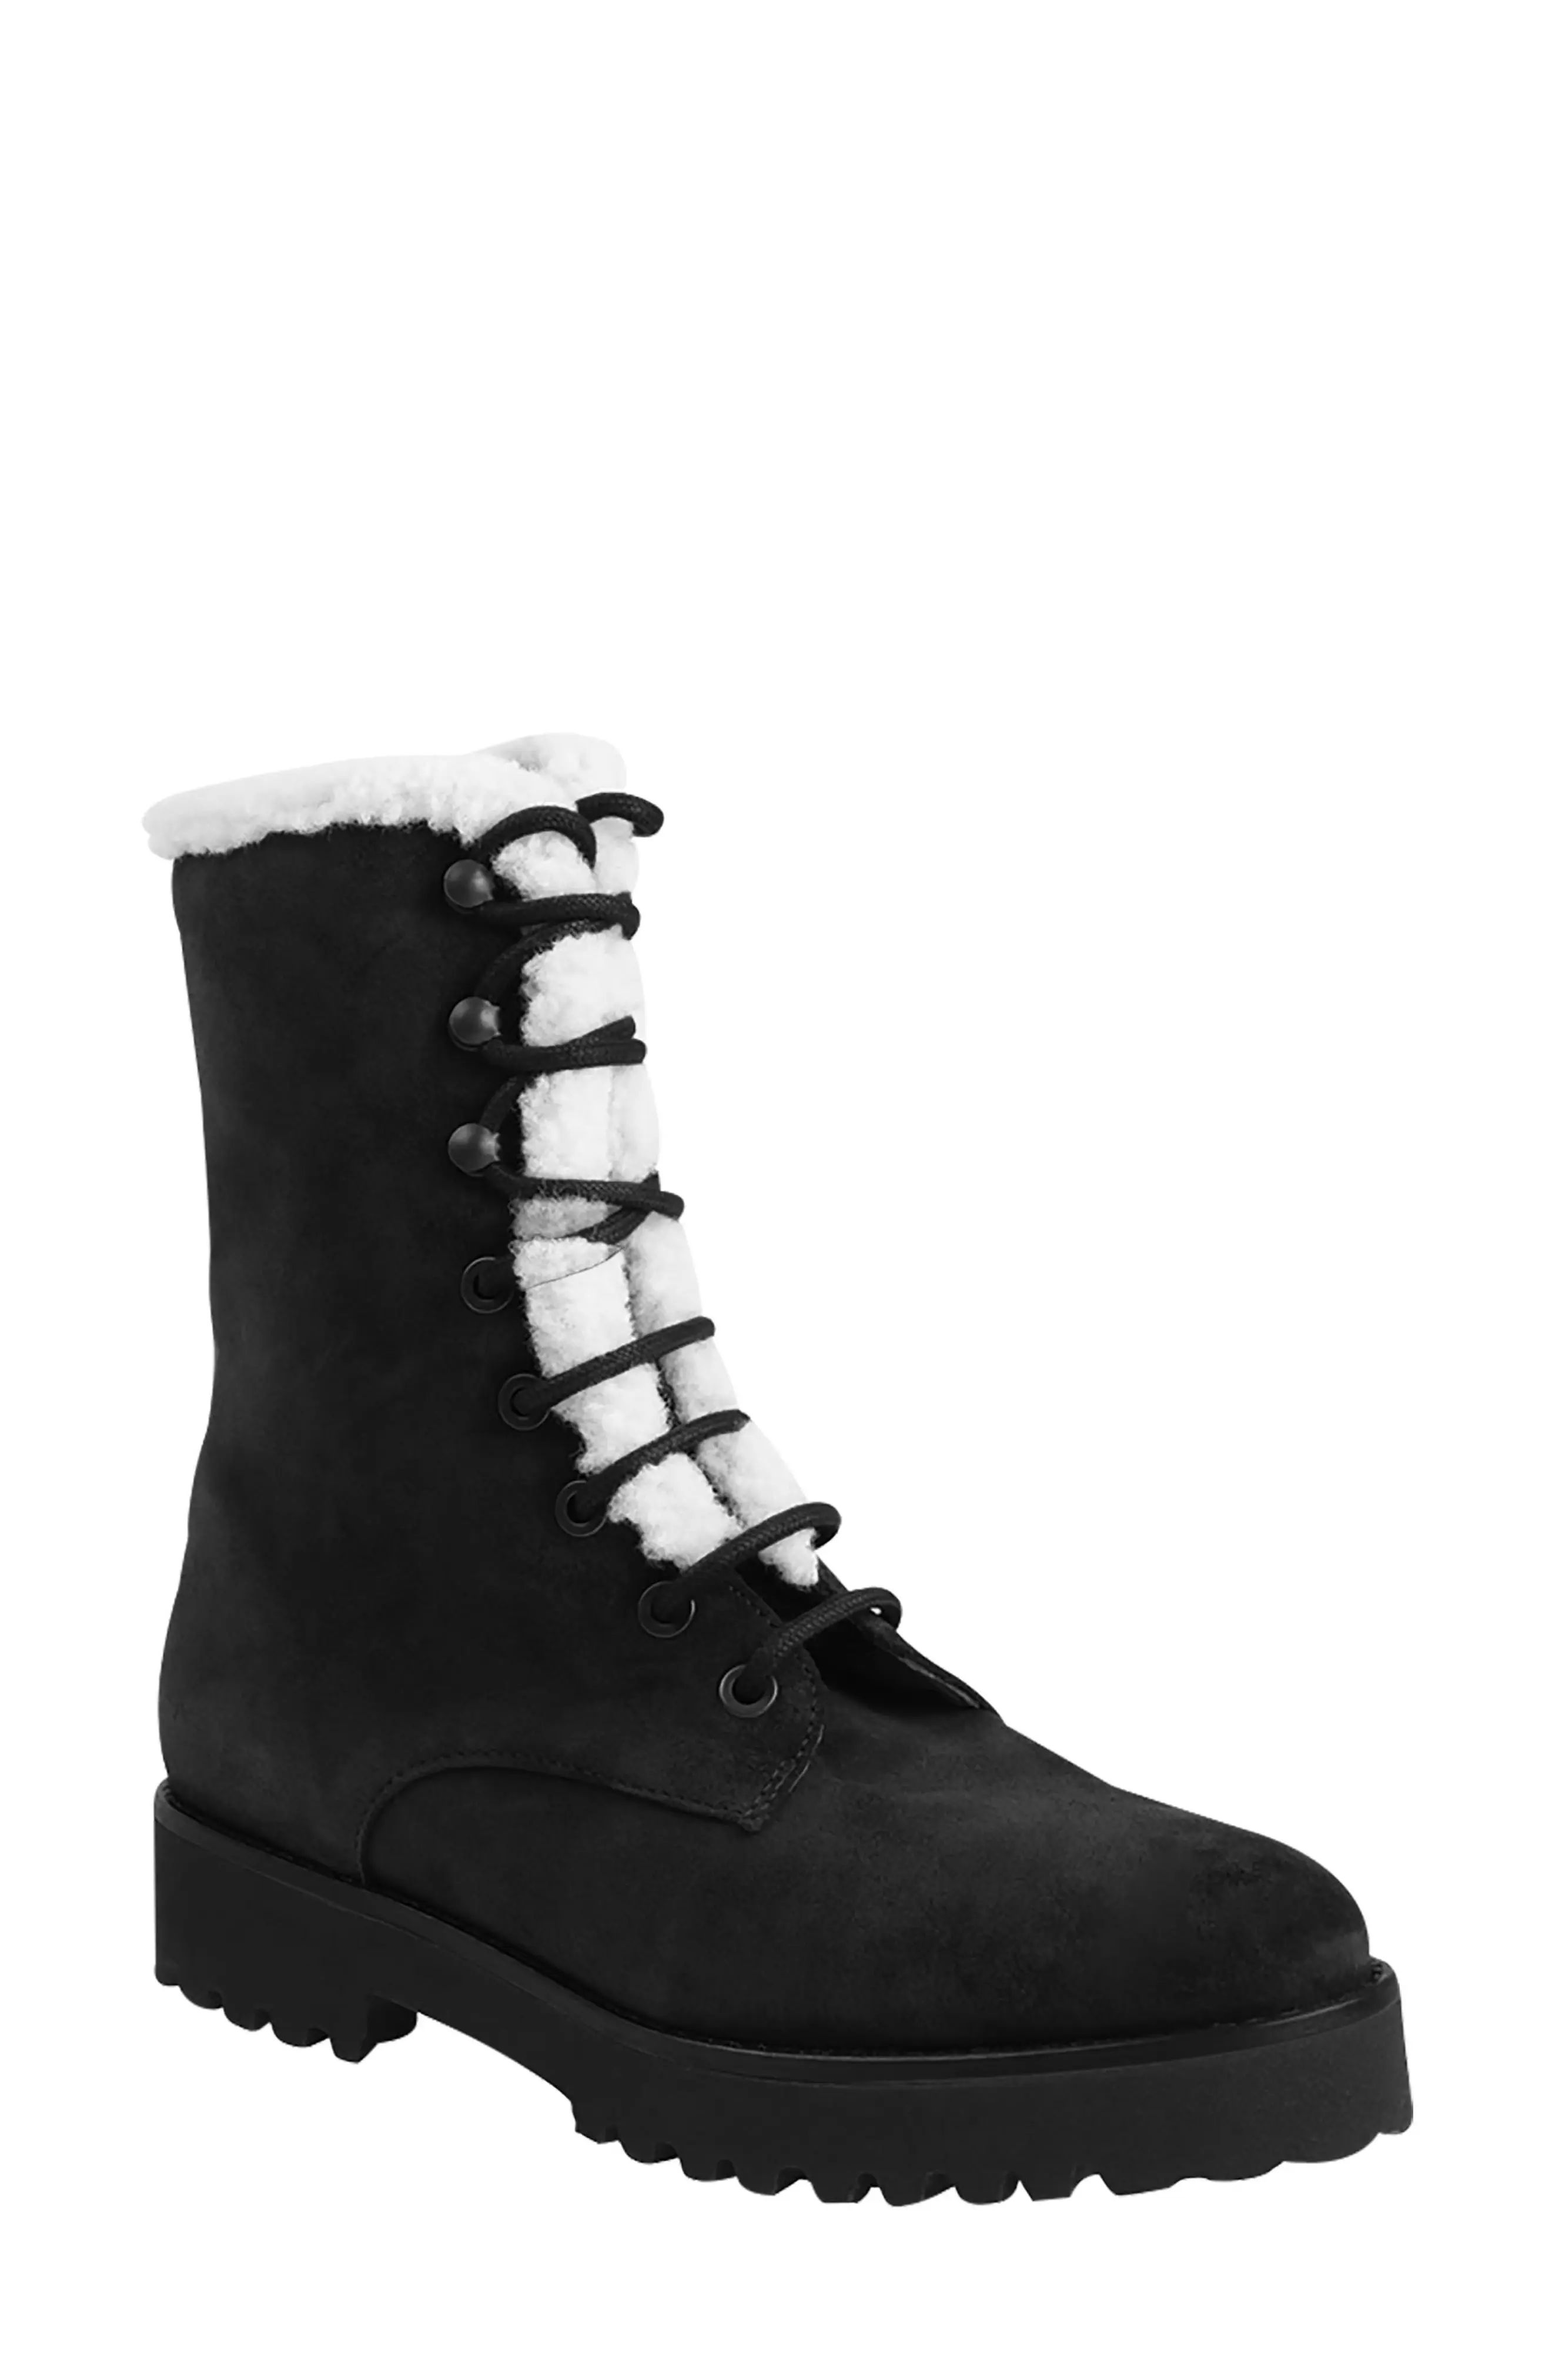 Women's Andre Assous Prisca Water Resistant Boot, Size 11 M - Black | Nordstrom